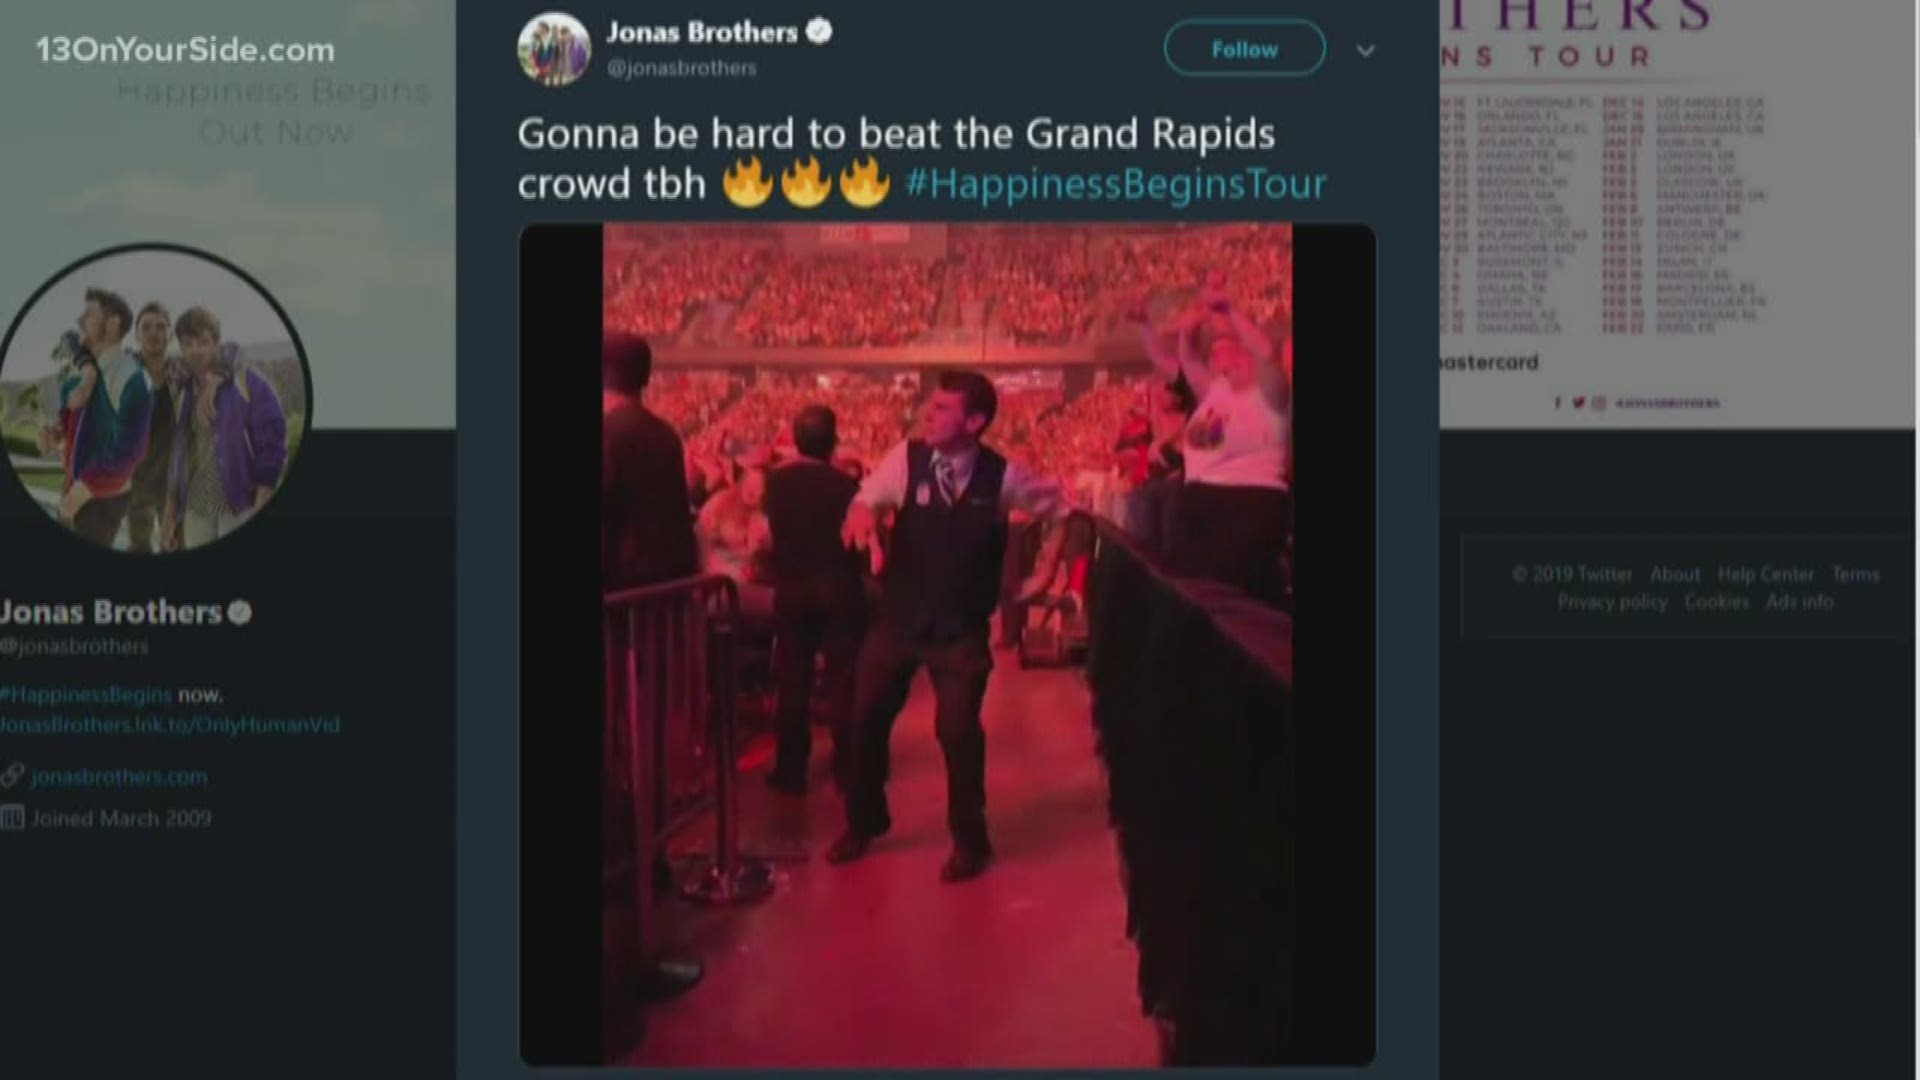 The crowd may have come to see the Jonas Brother, but they got an unexpected bonus at the Van Andel Arena: an usher with some serious moves. The Jonas Brothers tweeted about the star who stole the show, who will be live on Good Morning America Wednesday morning at 7 a.m.